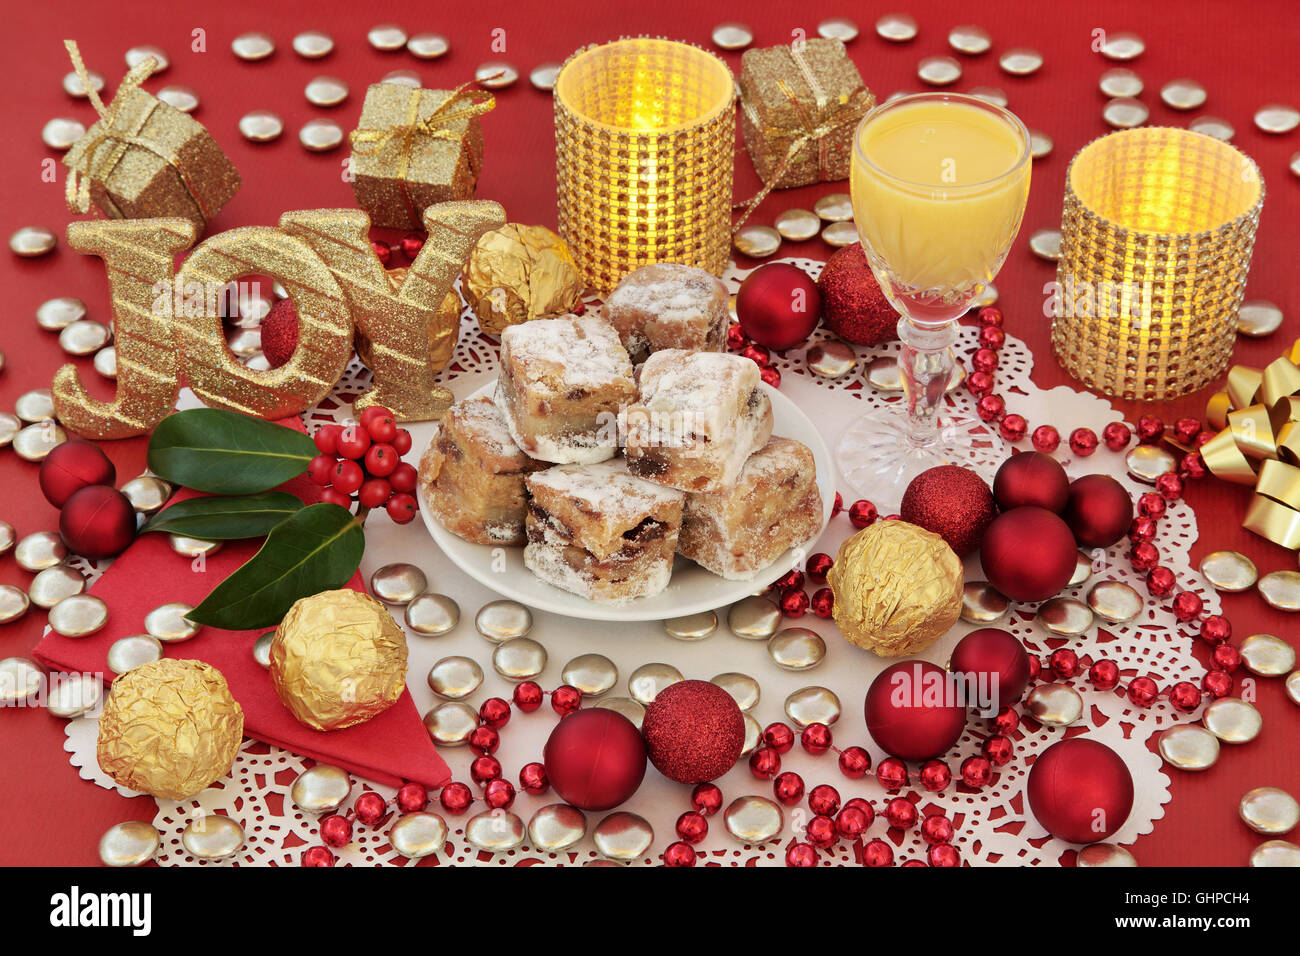 Christmas sweet food with stollen cake bites, candles, gold glitter joy sign, advocaat egg nog, holly and decorations. Stock Photo